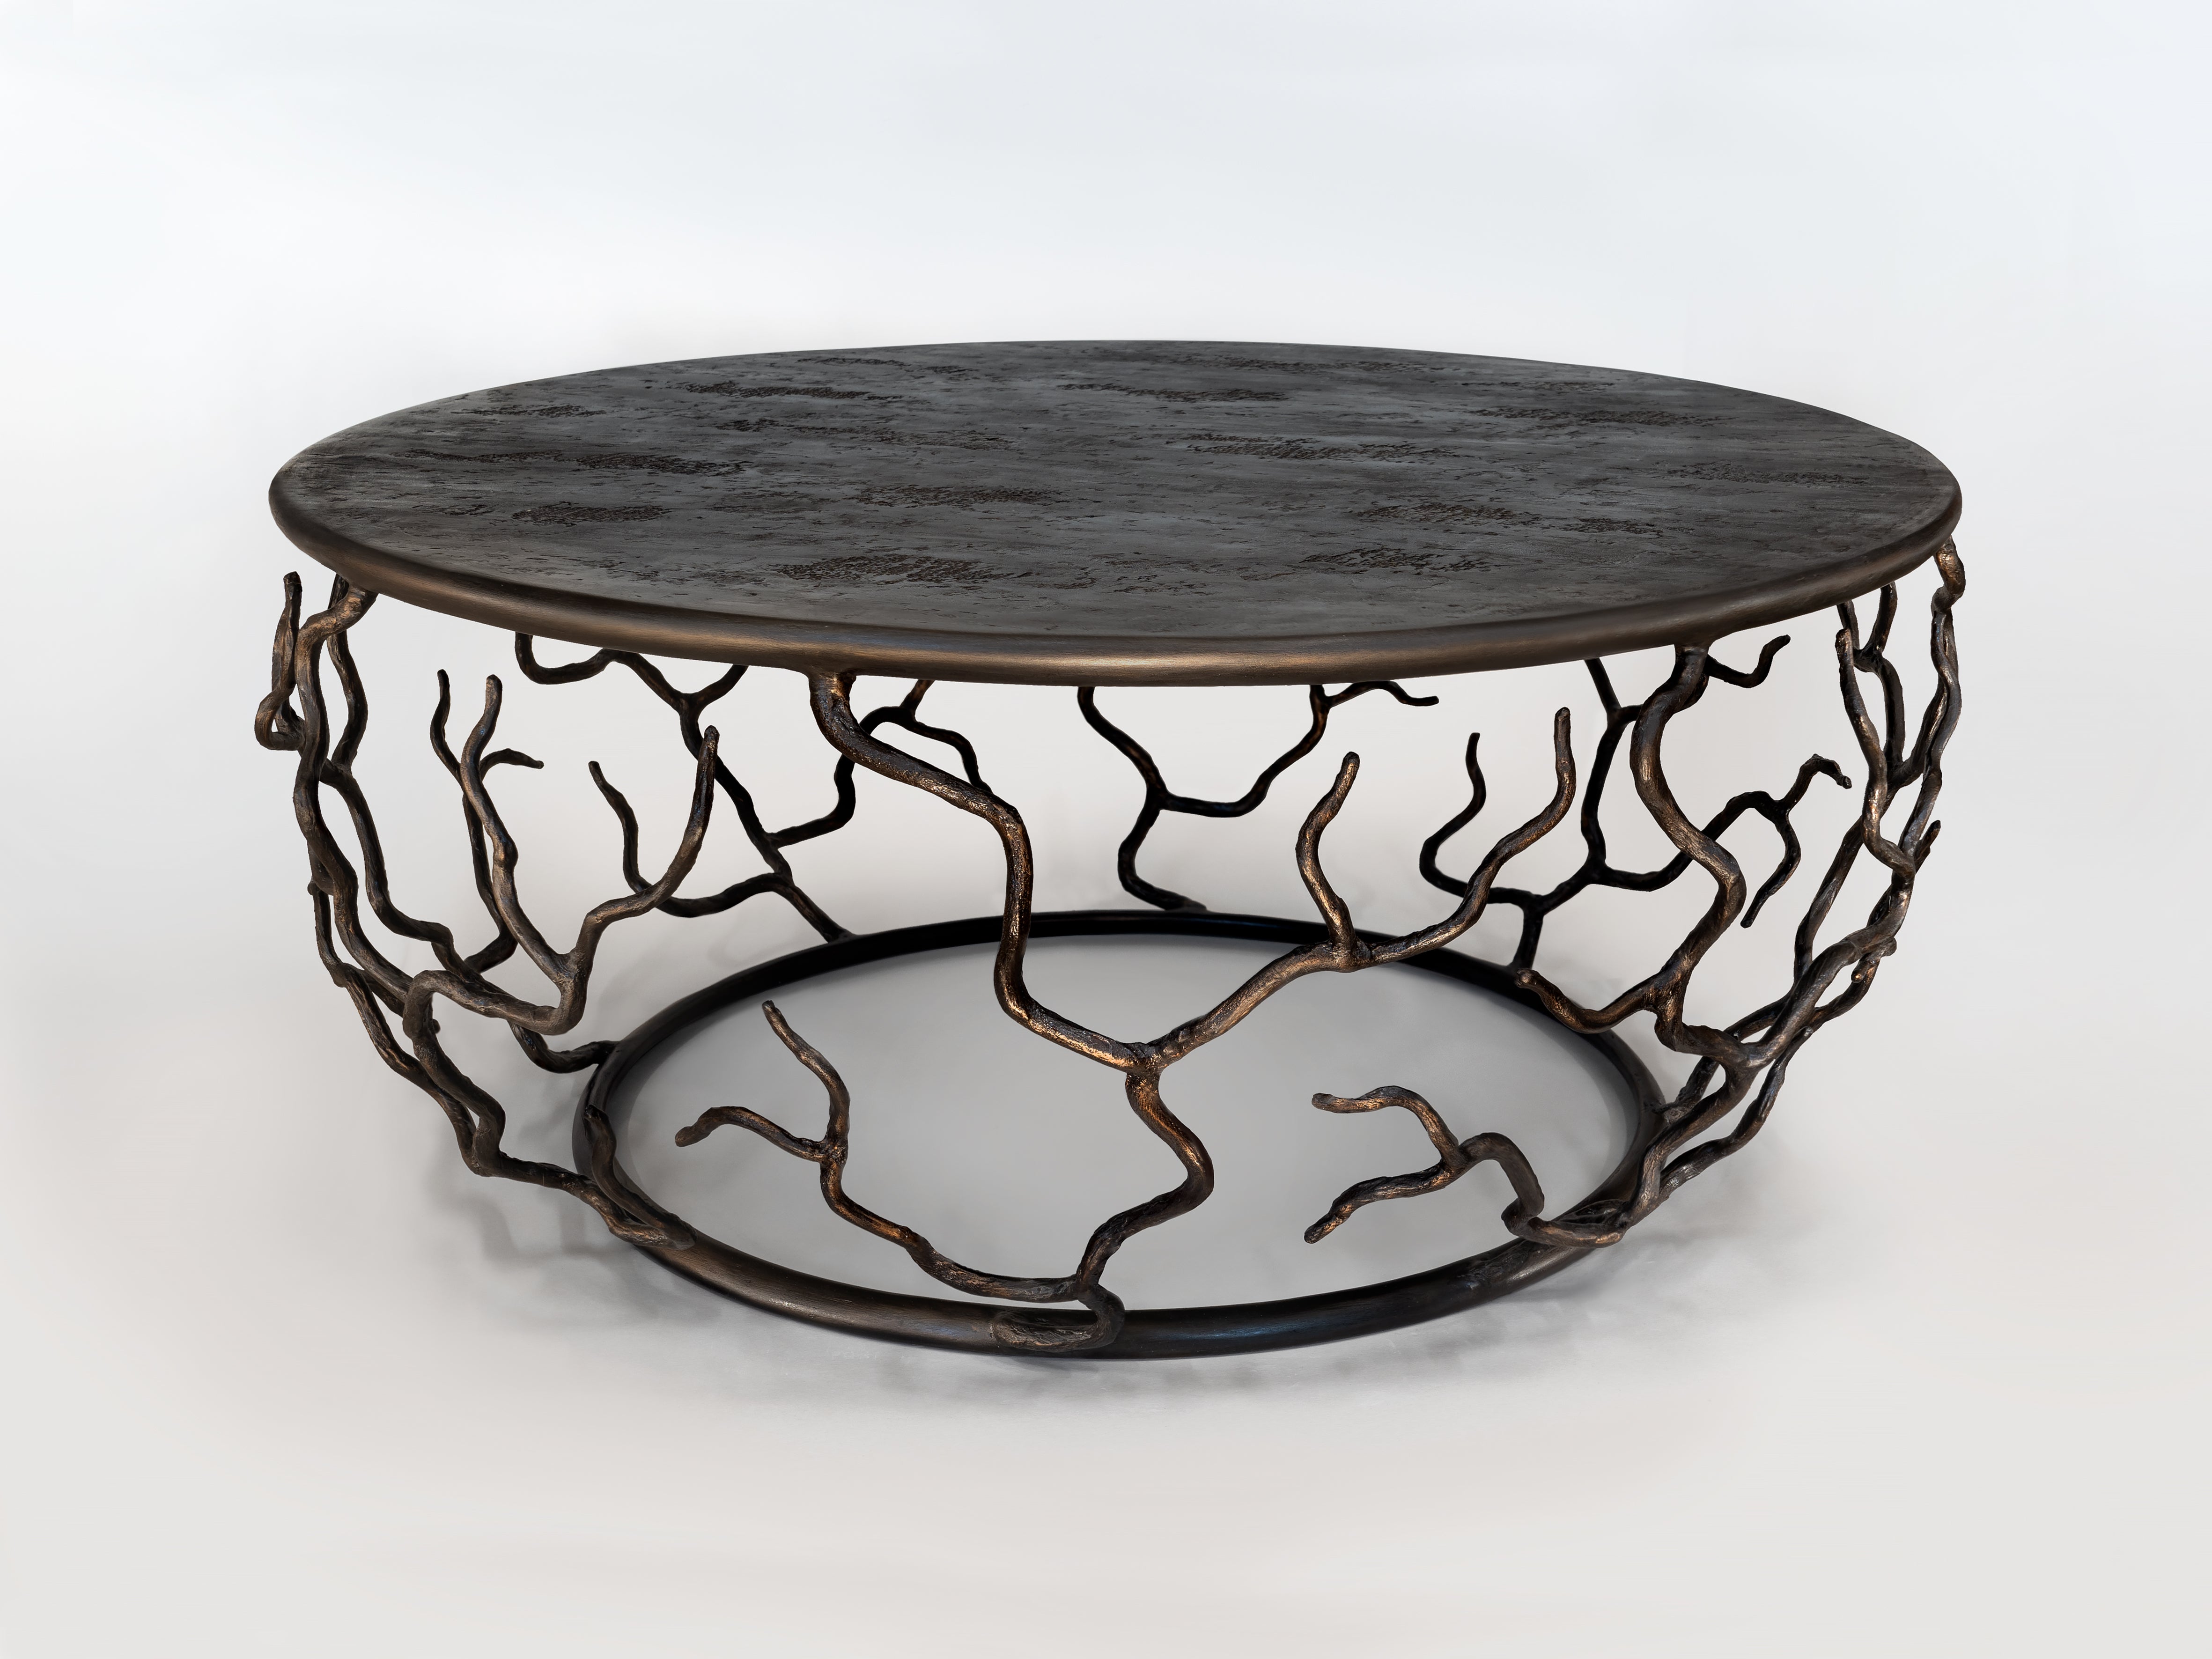 Organic forms and natural motifs. The Etna coffee table is individually hammered and hand formed. Each piece has been skillfully finished to resemble the texture of tree bark. The Top is hand-sculpted. Available also in Antique Gold Finish.
One